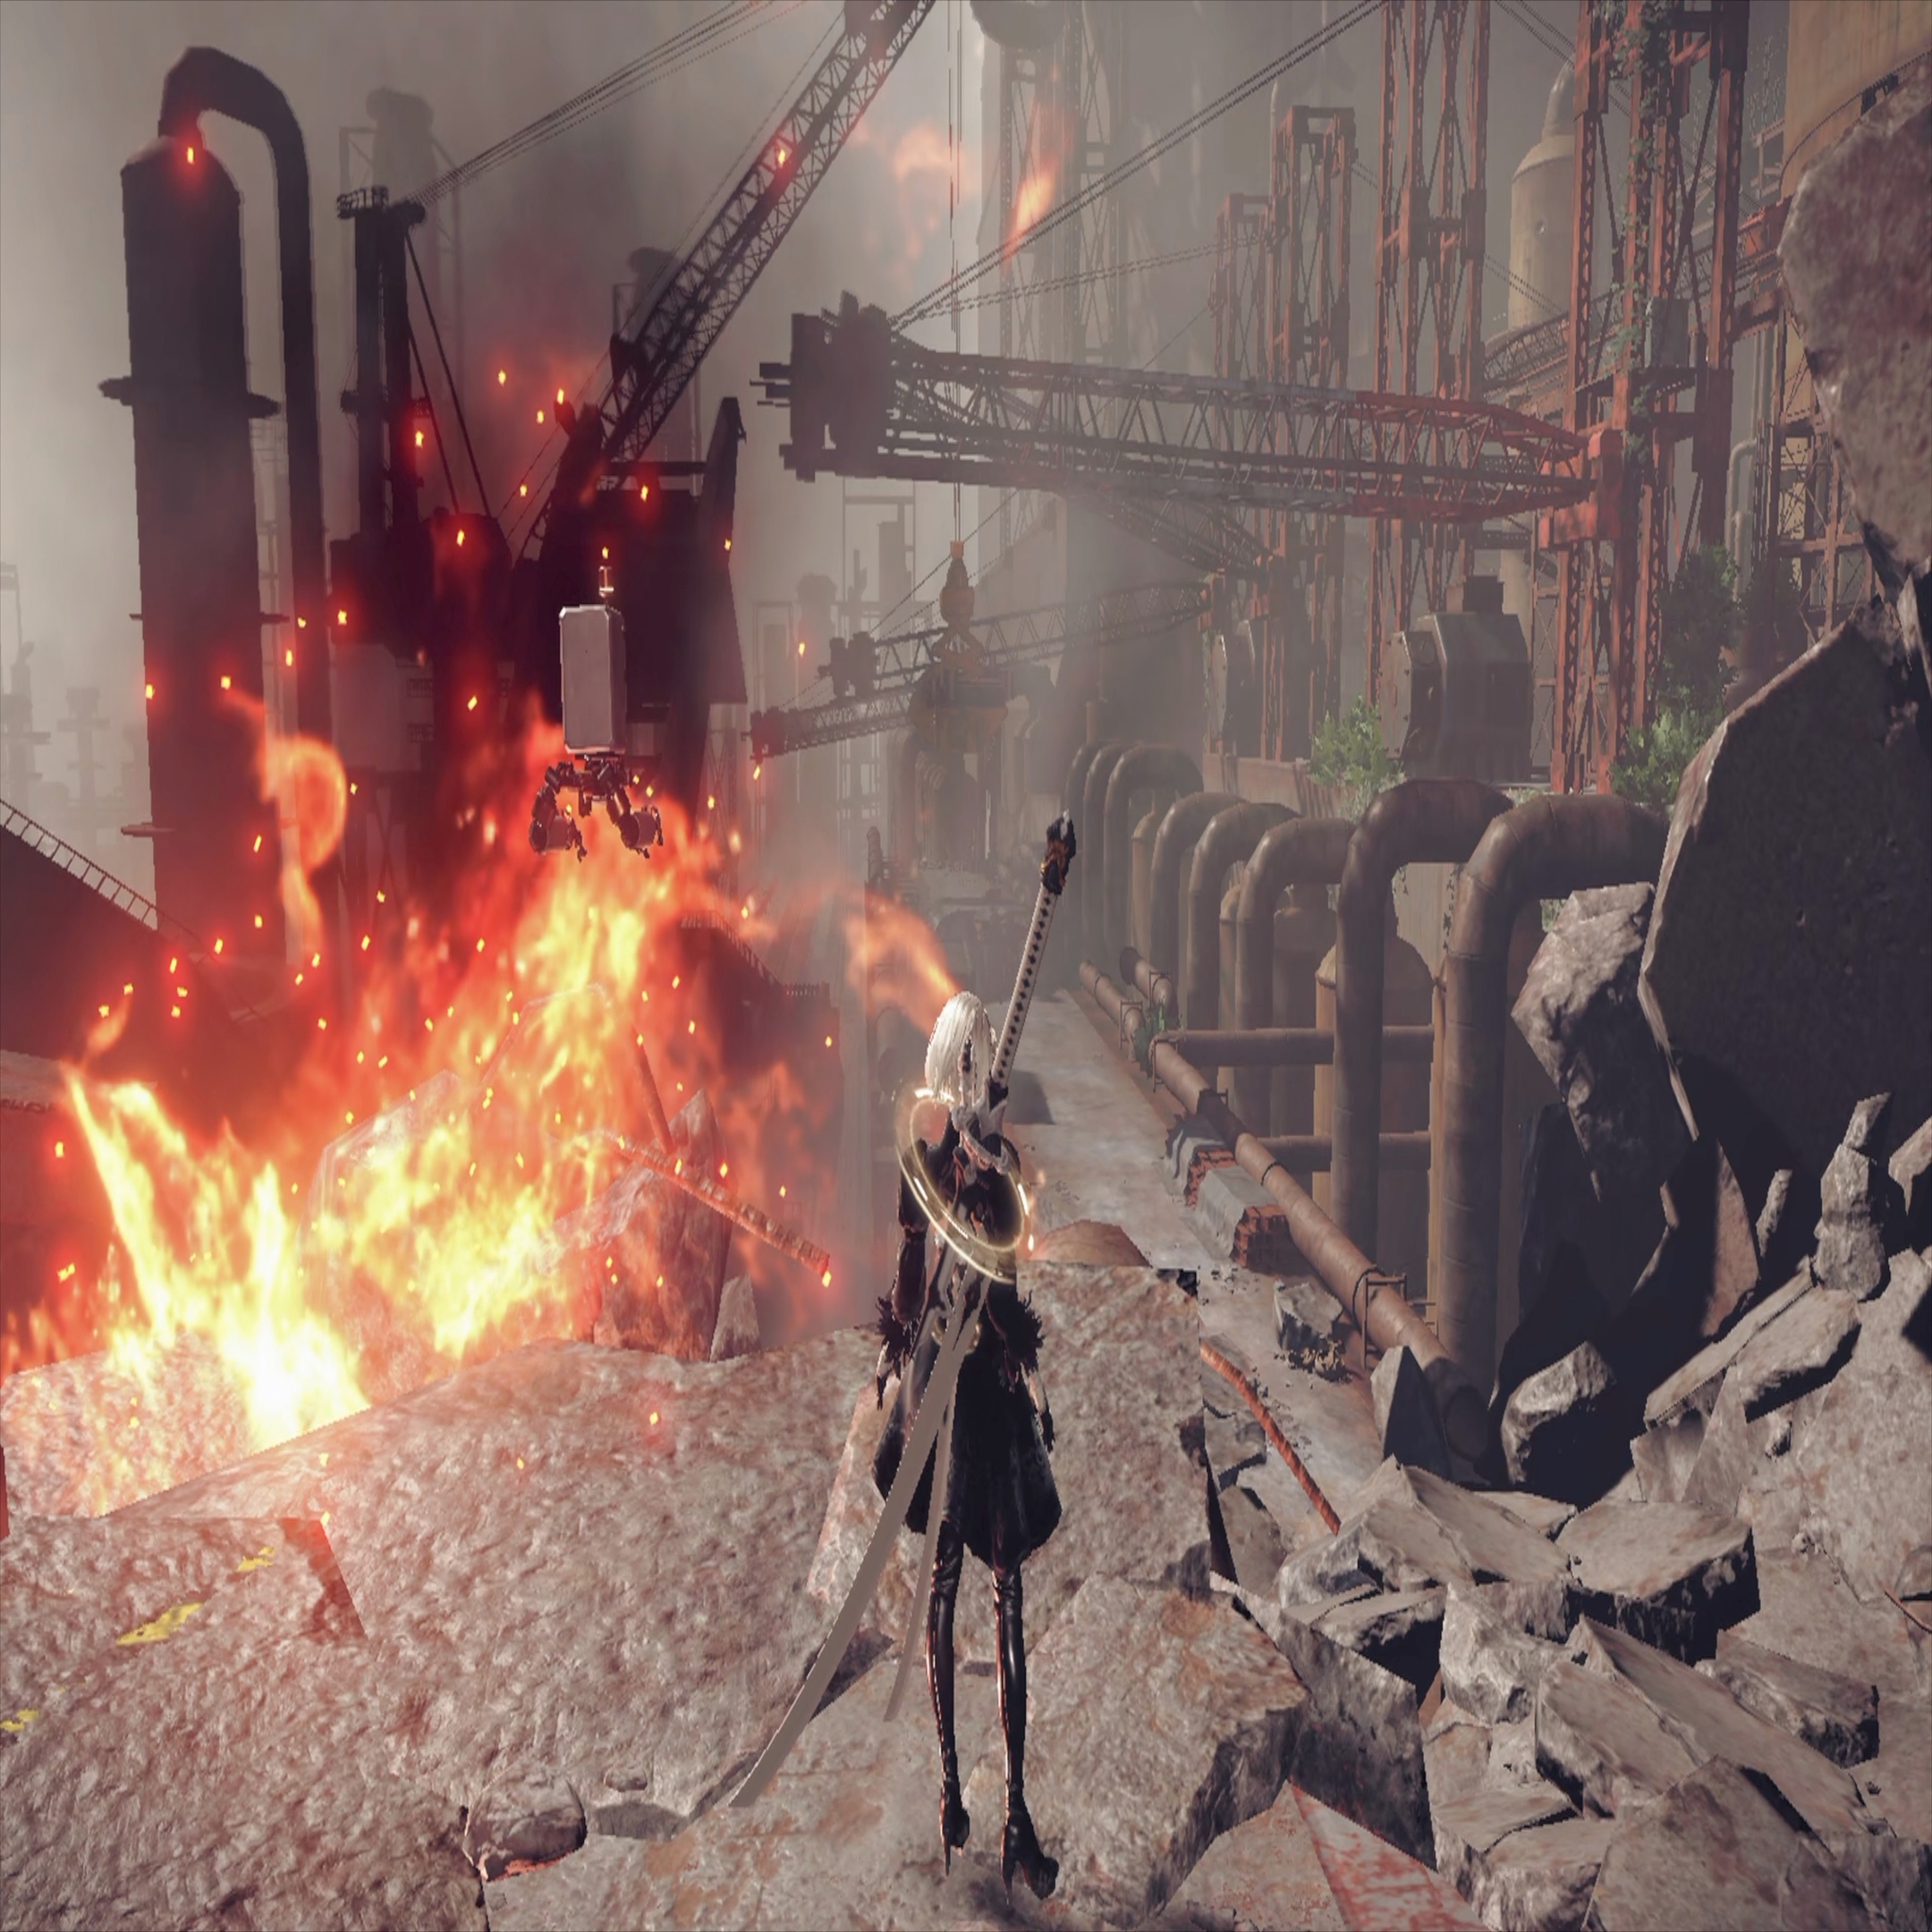 Nier Automata on Switch Shows The Glory of Portkind - GamerBraves